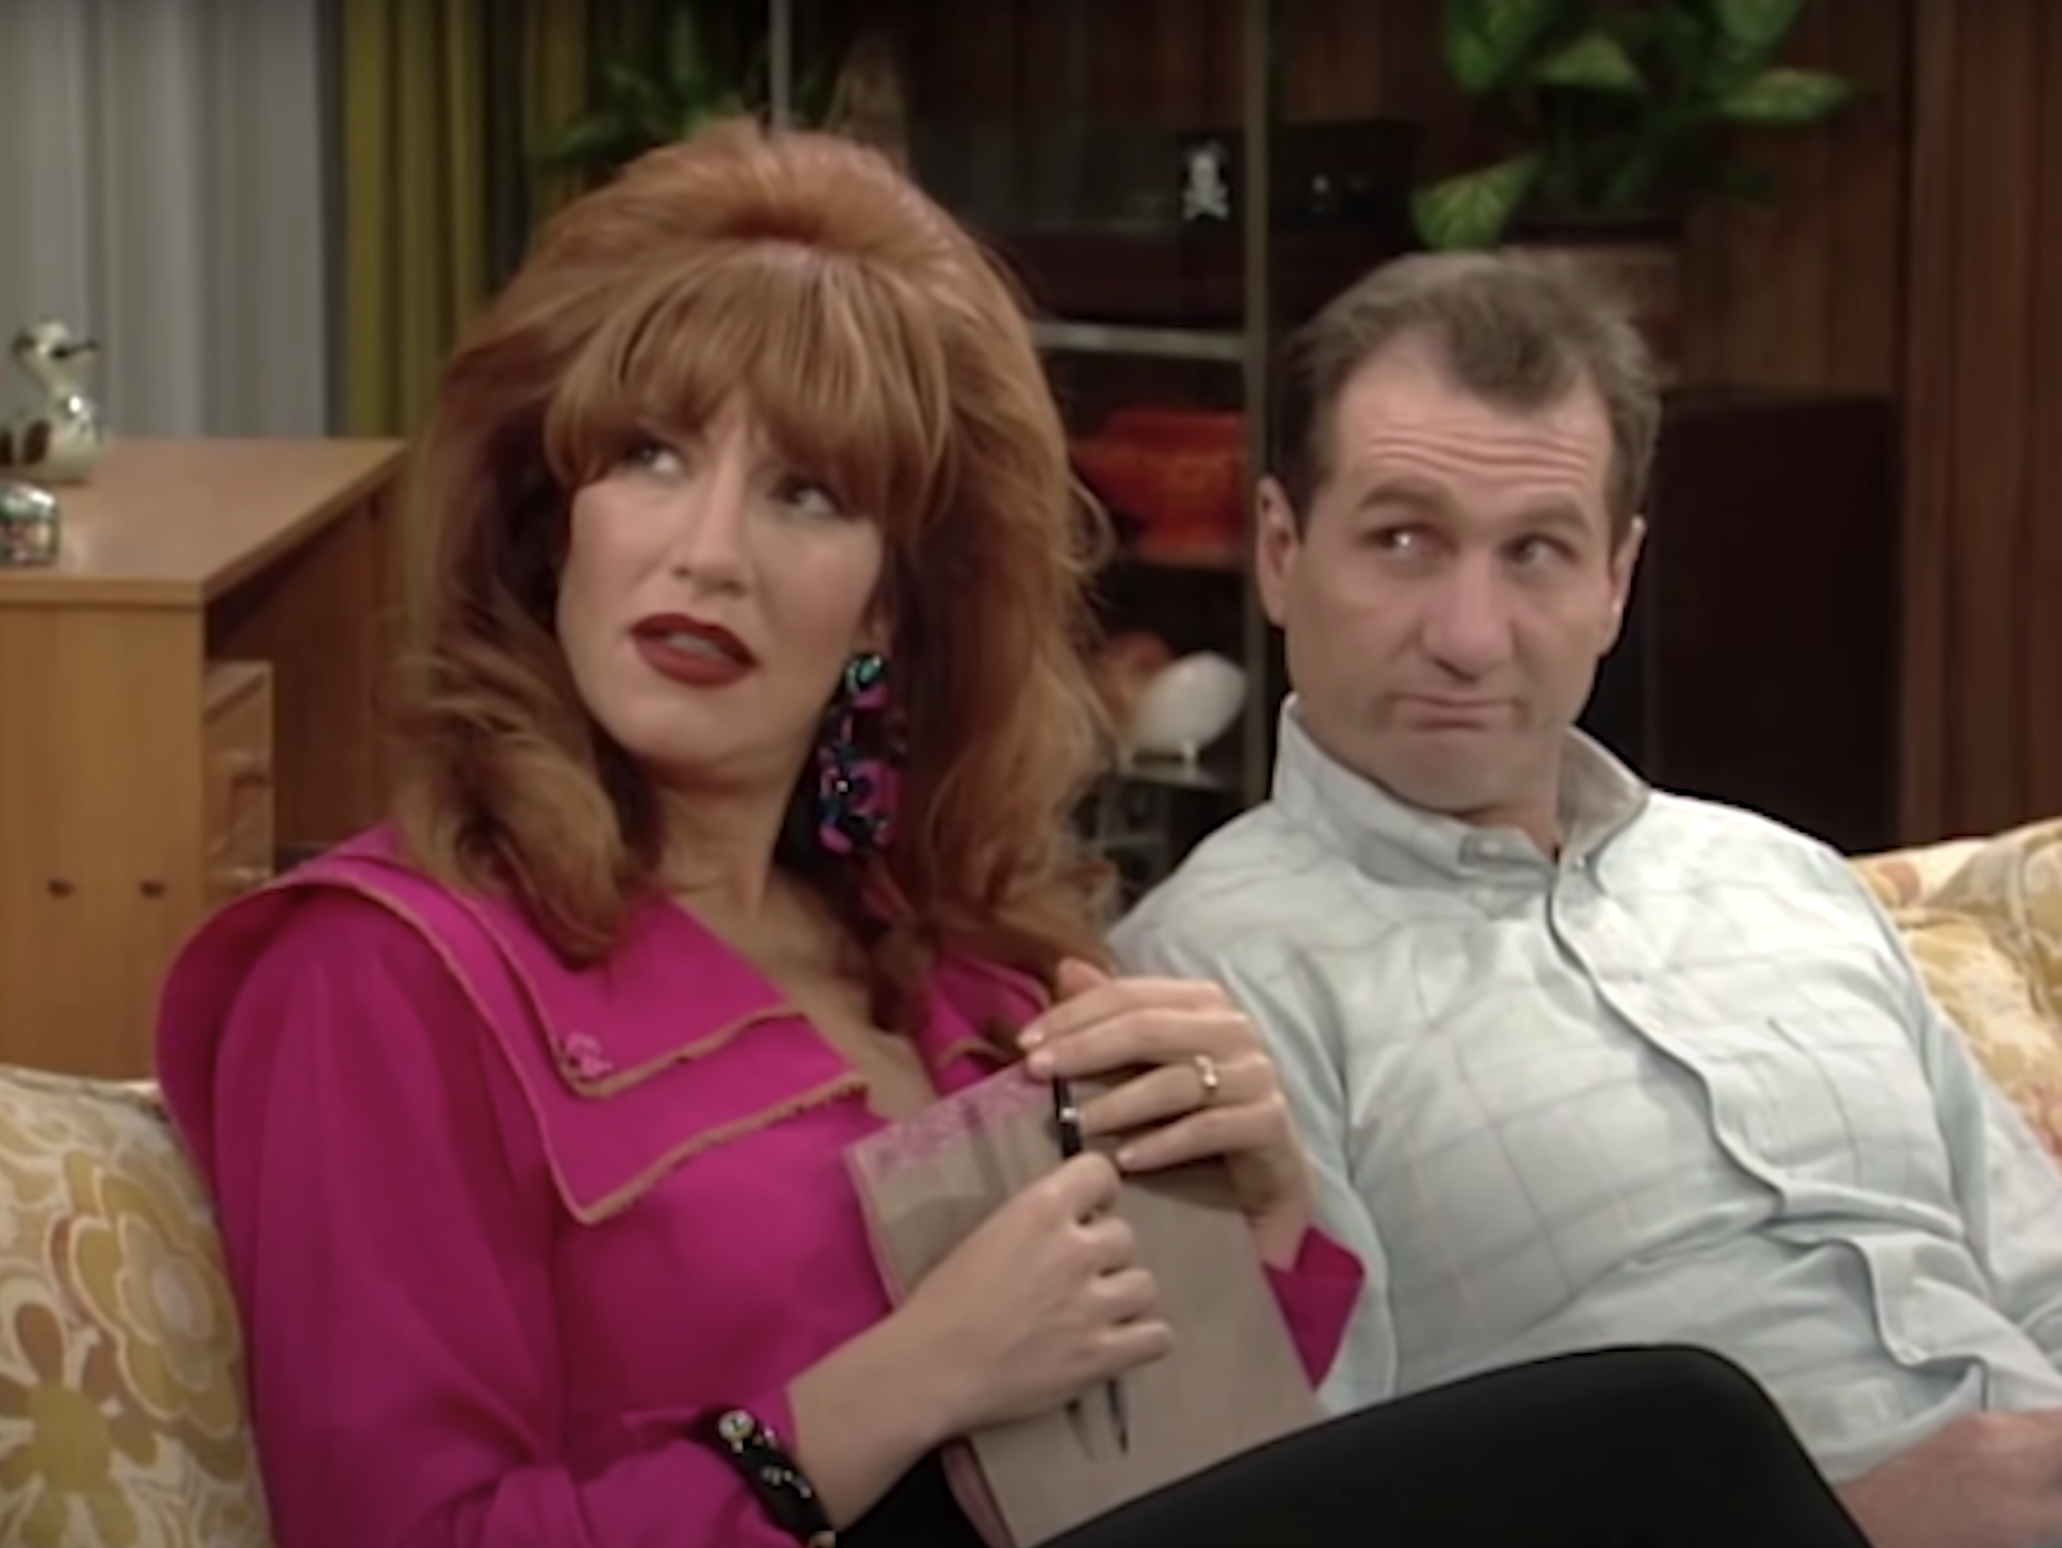 Al Bundy and Peggy sitting on the couch. 